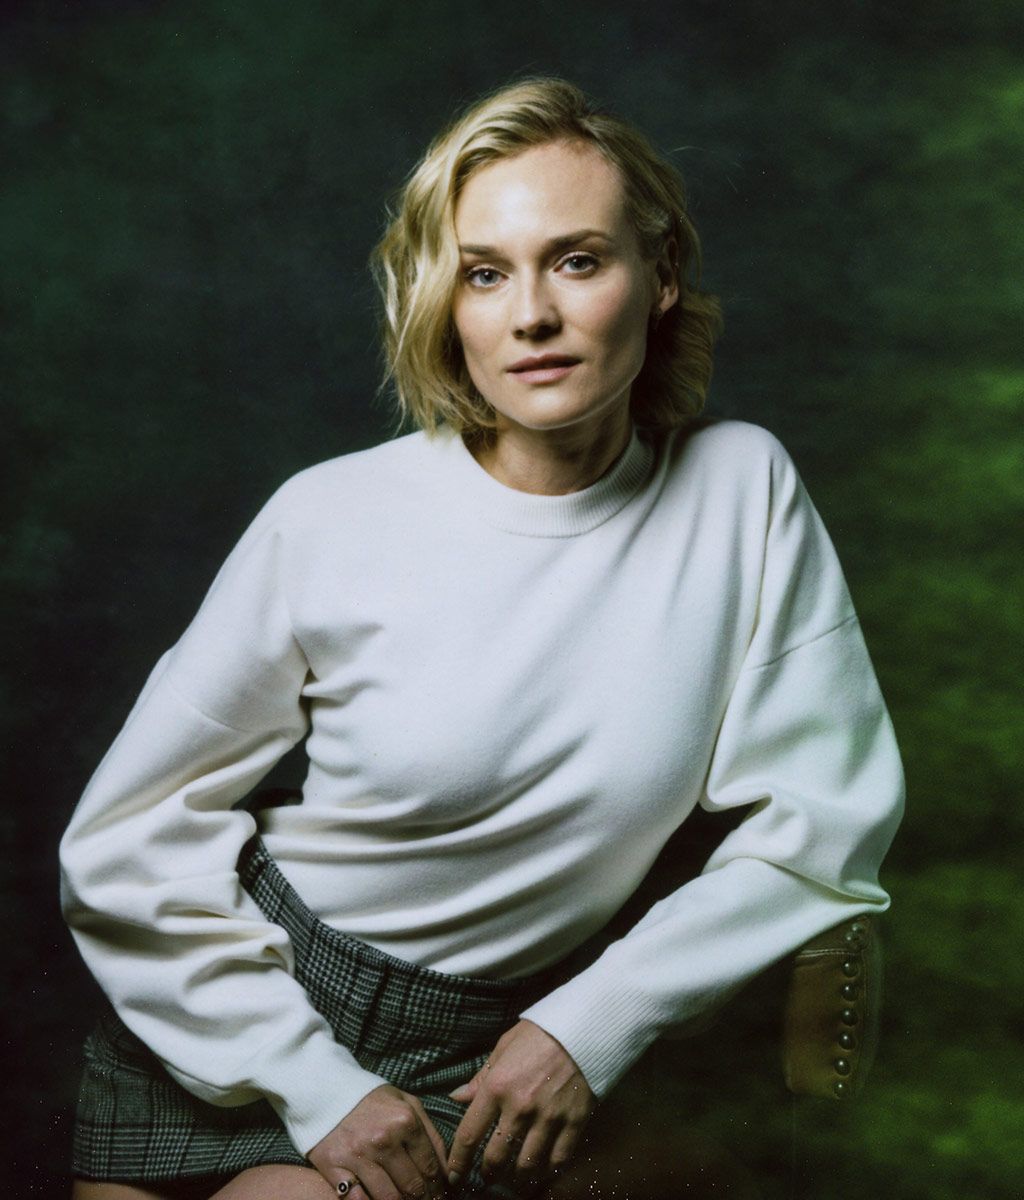 Diane KRUGER : Biography and movies